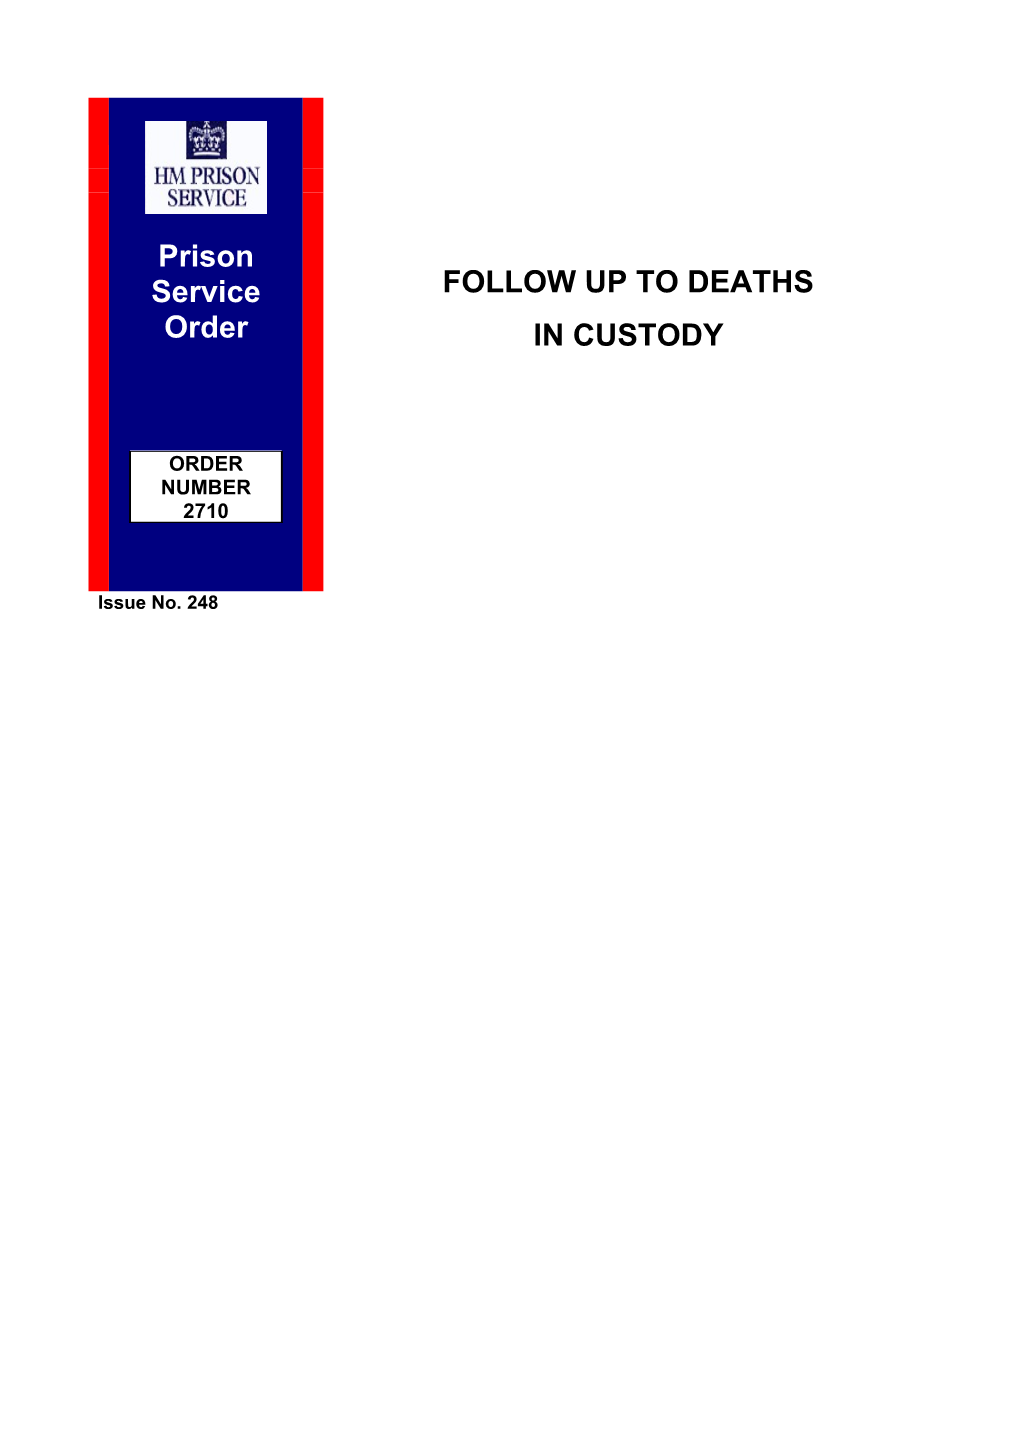 PSO 2710 - Follow up to Deaths in Custody